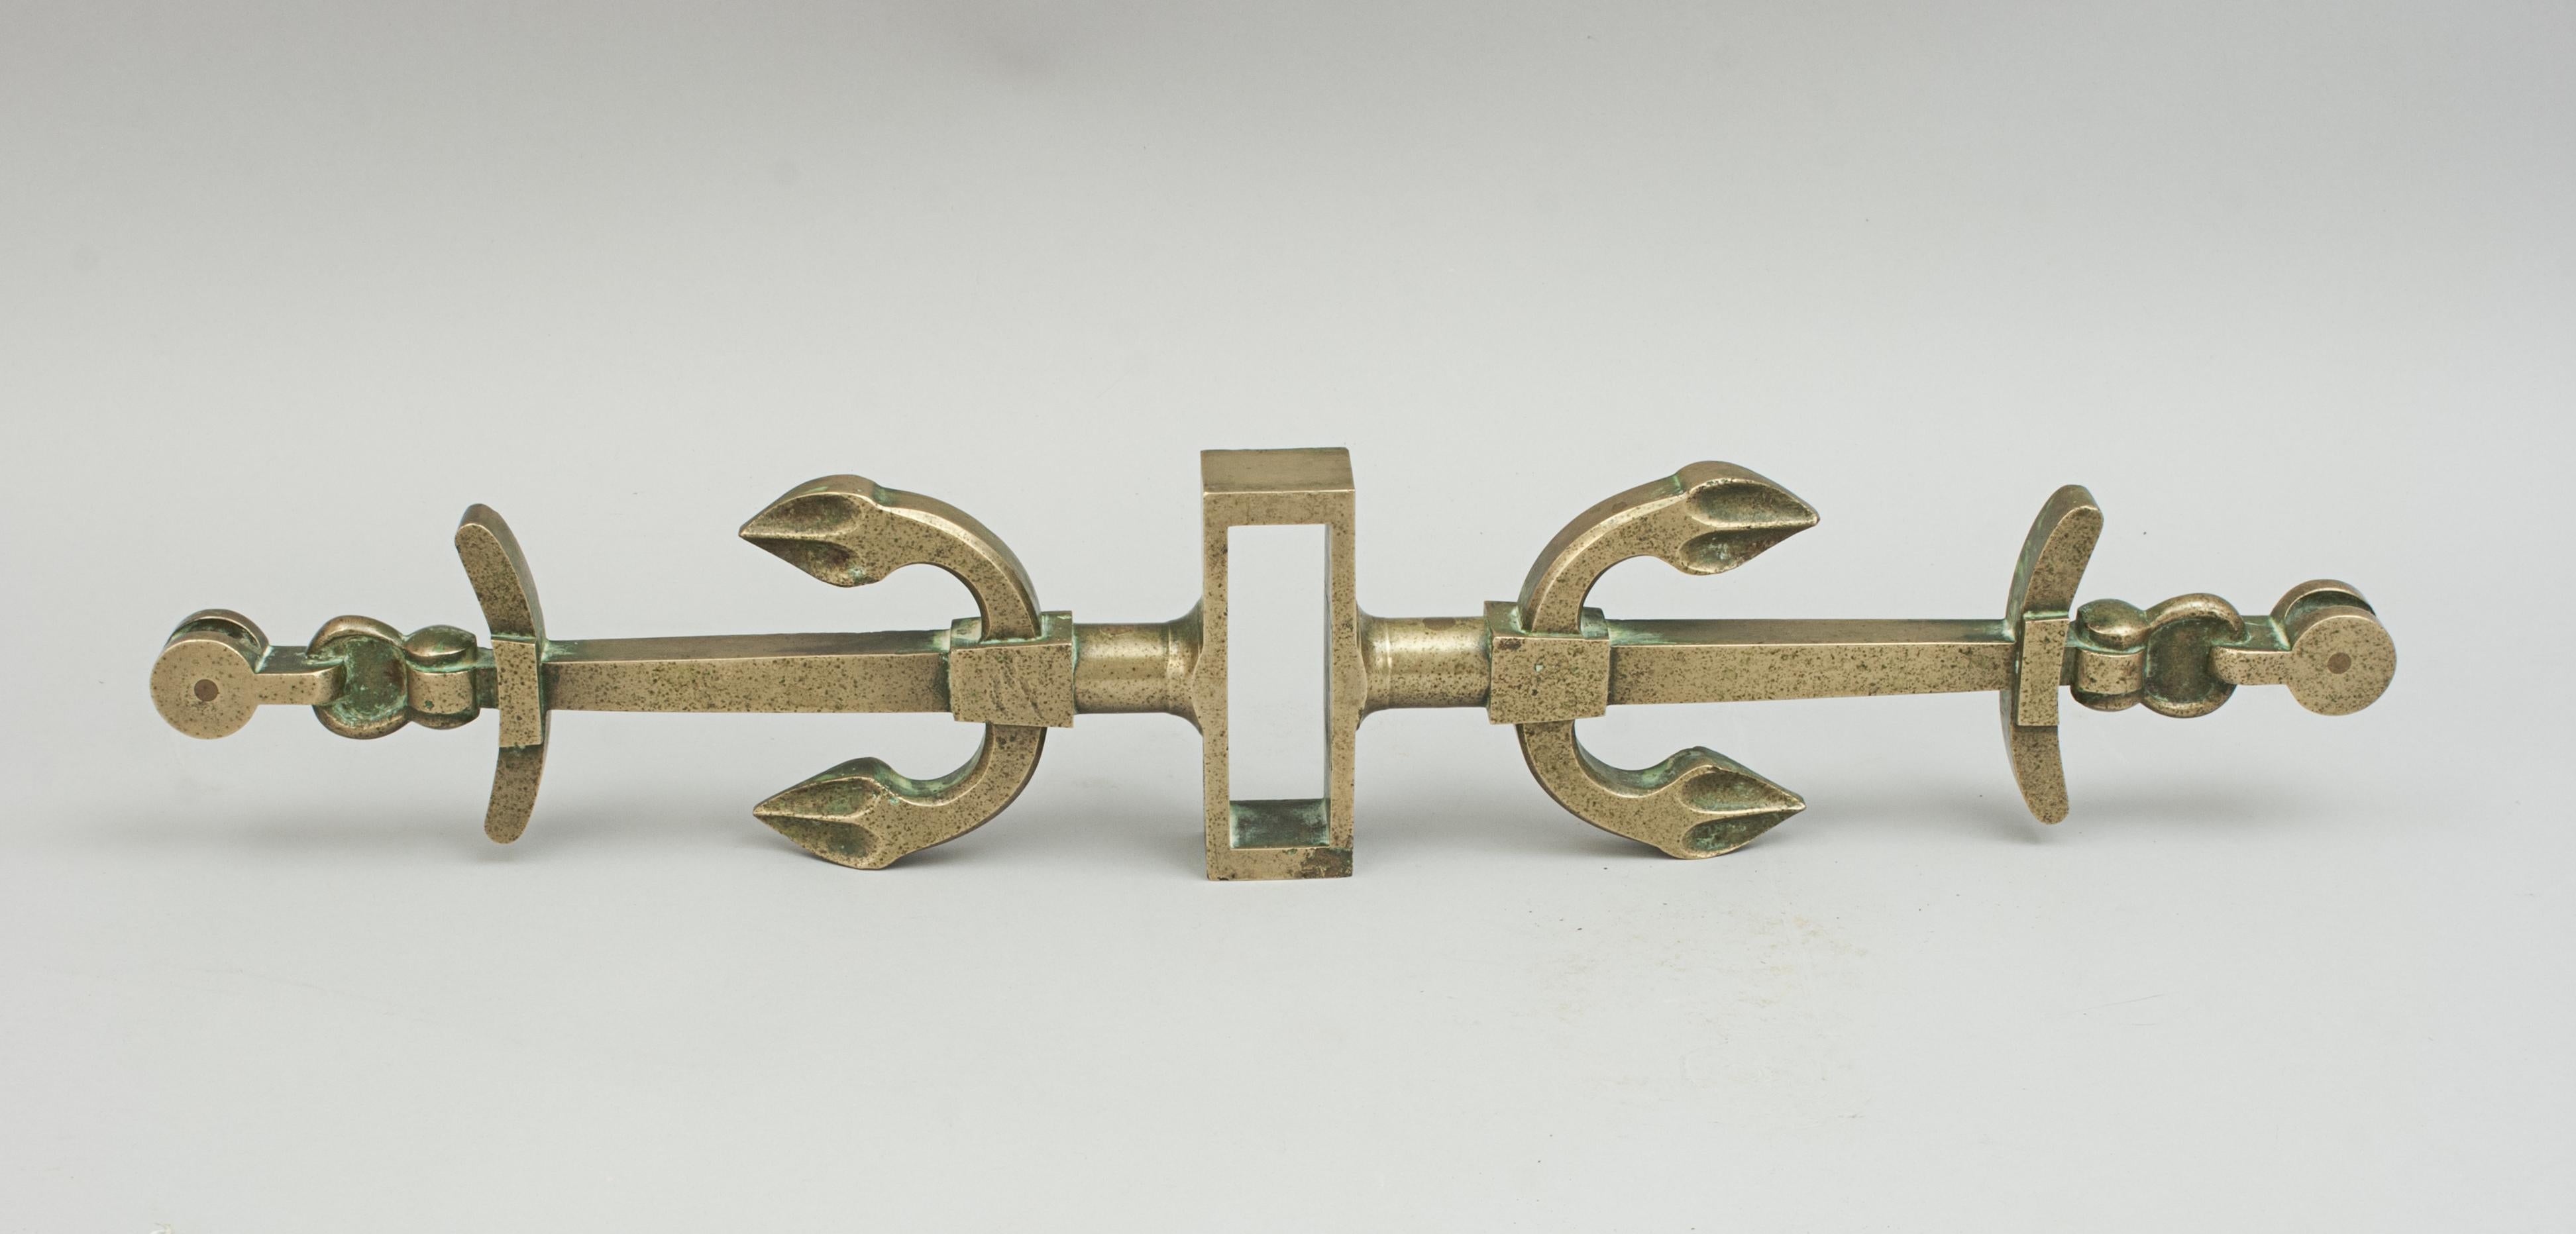 Bronze Tiller Yoke.
A late 19th century cast bronze rudder yoke with decorative detailing of two opposing anchors. It has a square opening for the rudder head and with single brass pulleys at the two ends. A nice decorative piece of maritime